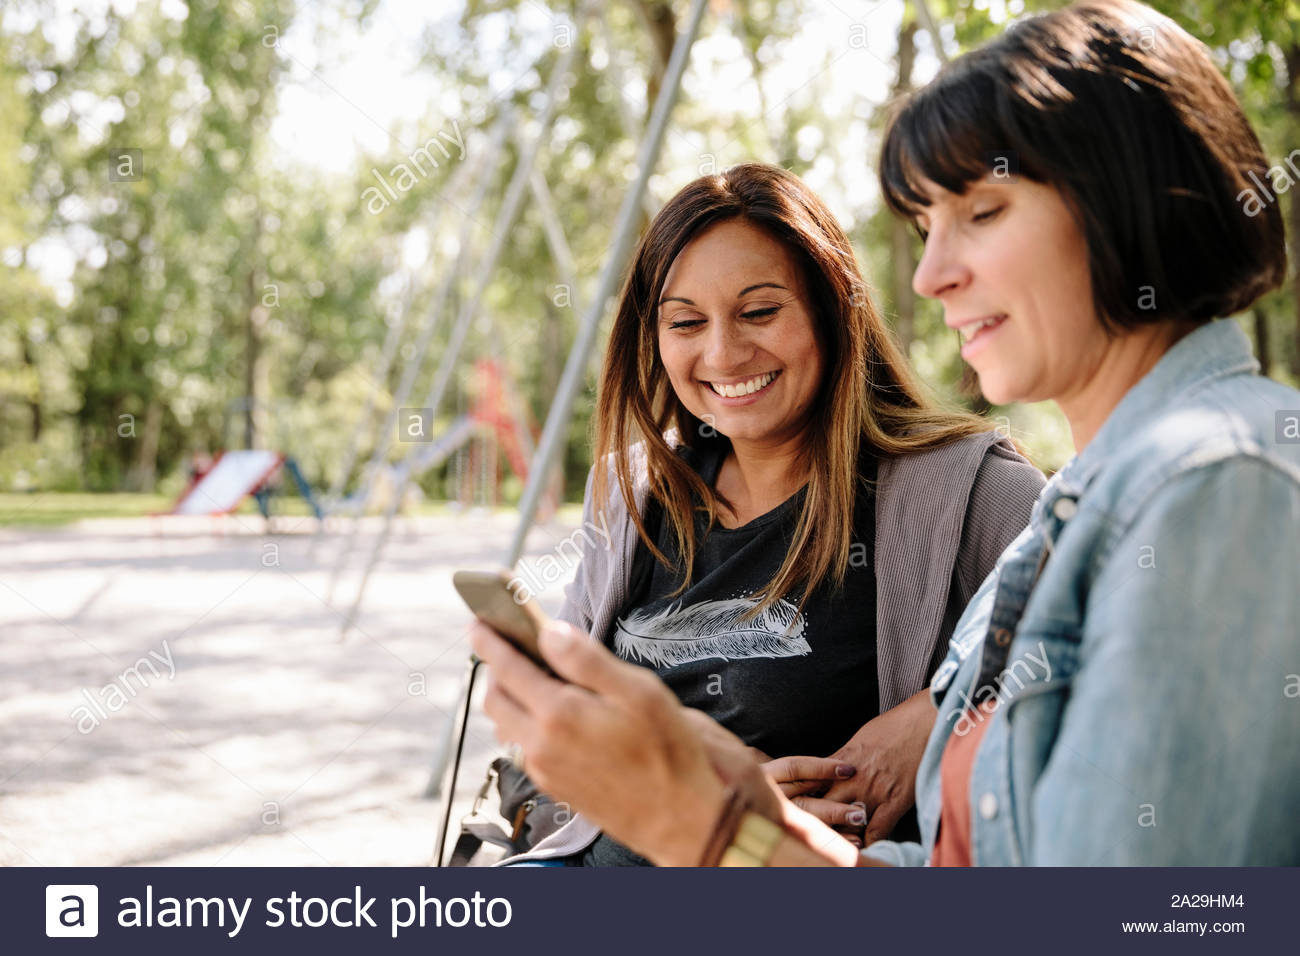 Two women in park using smartphone and smiling Stock Photo